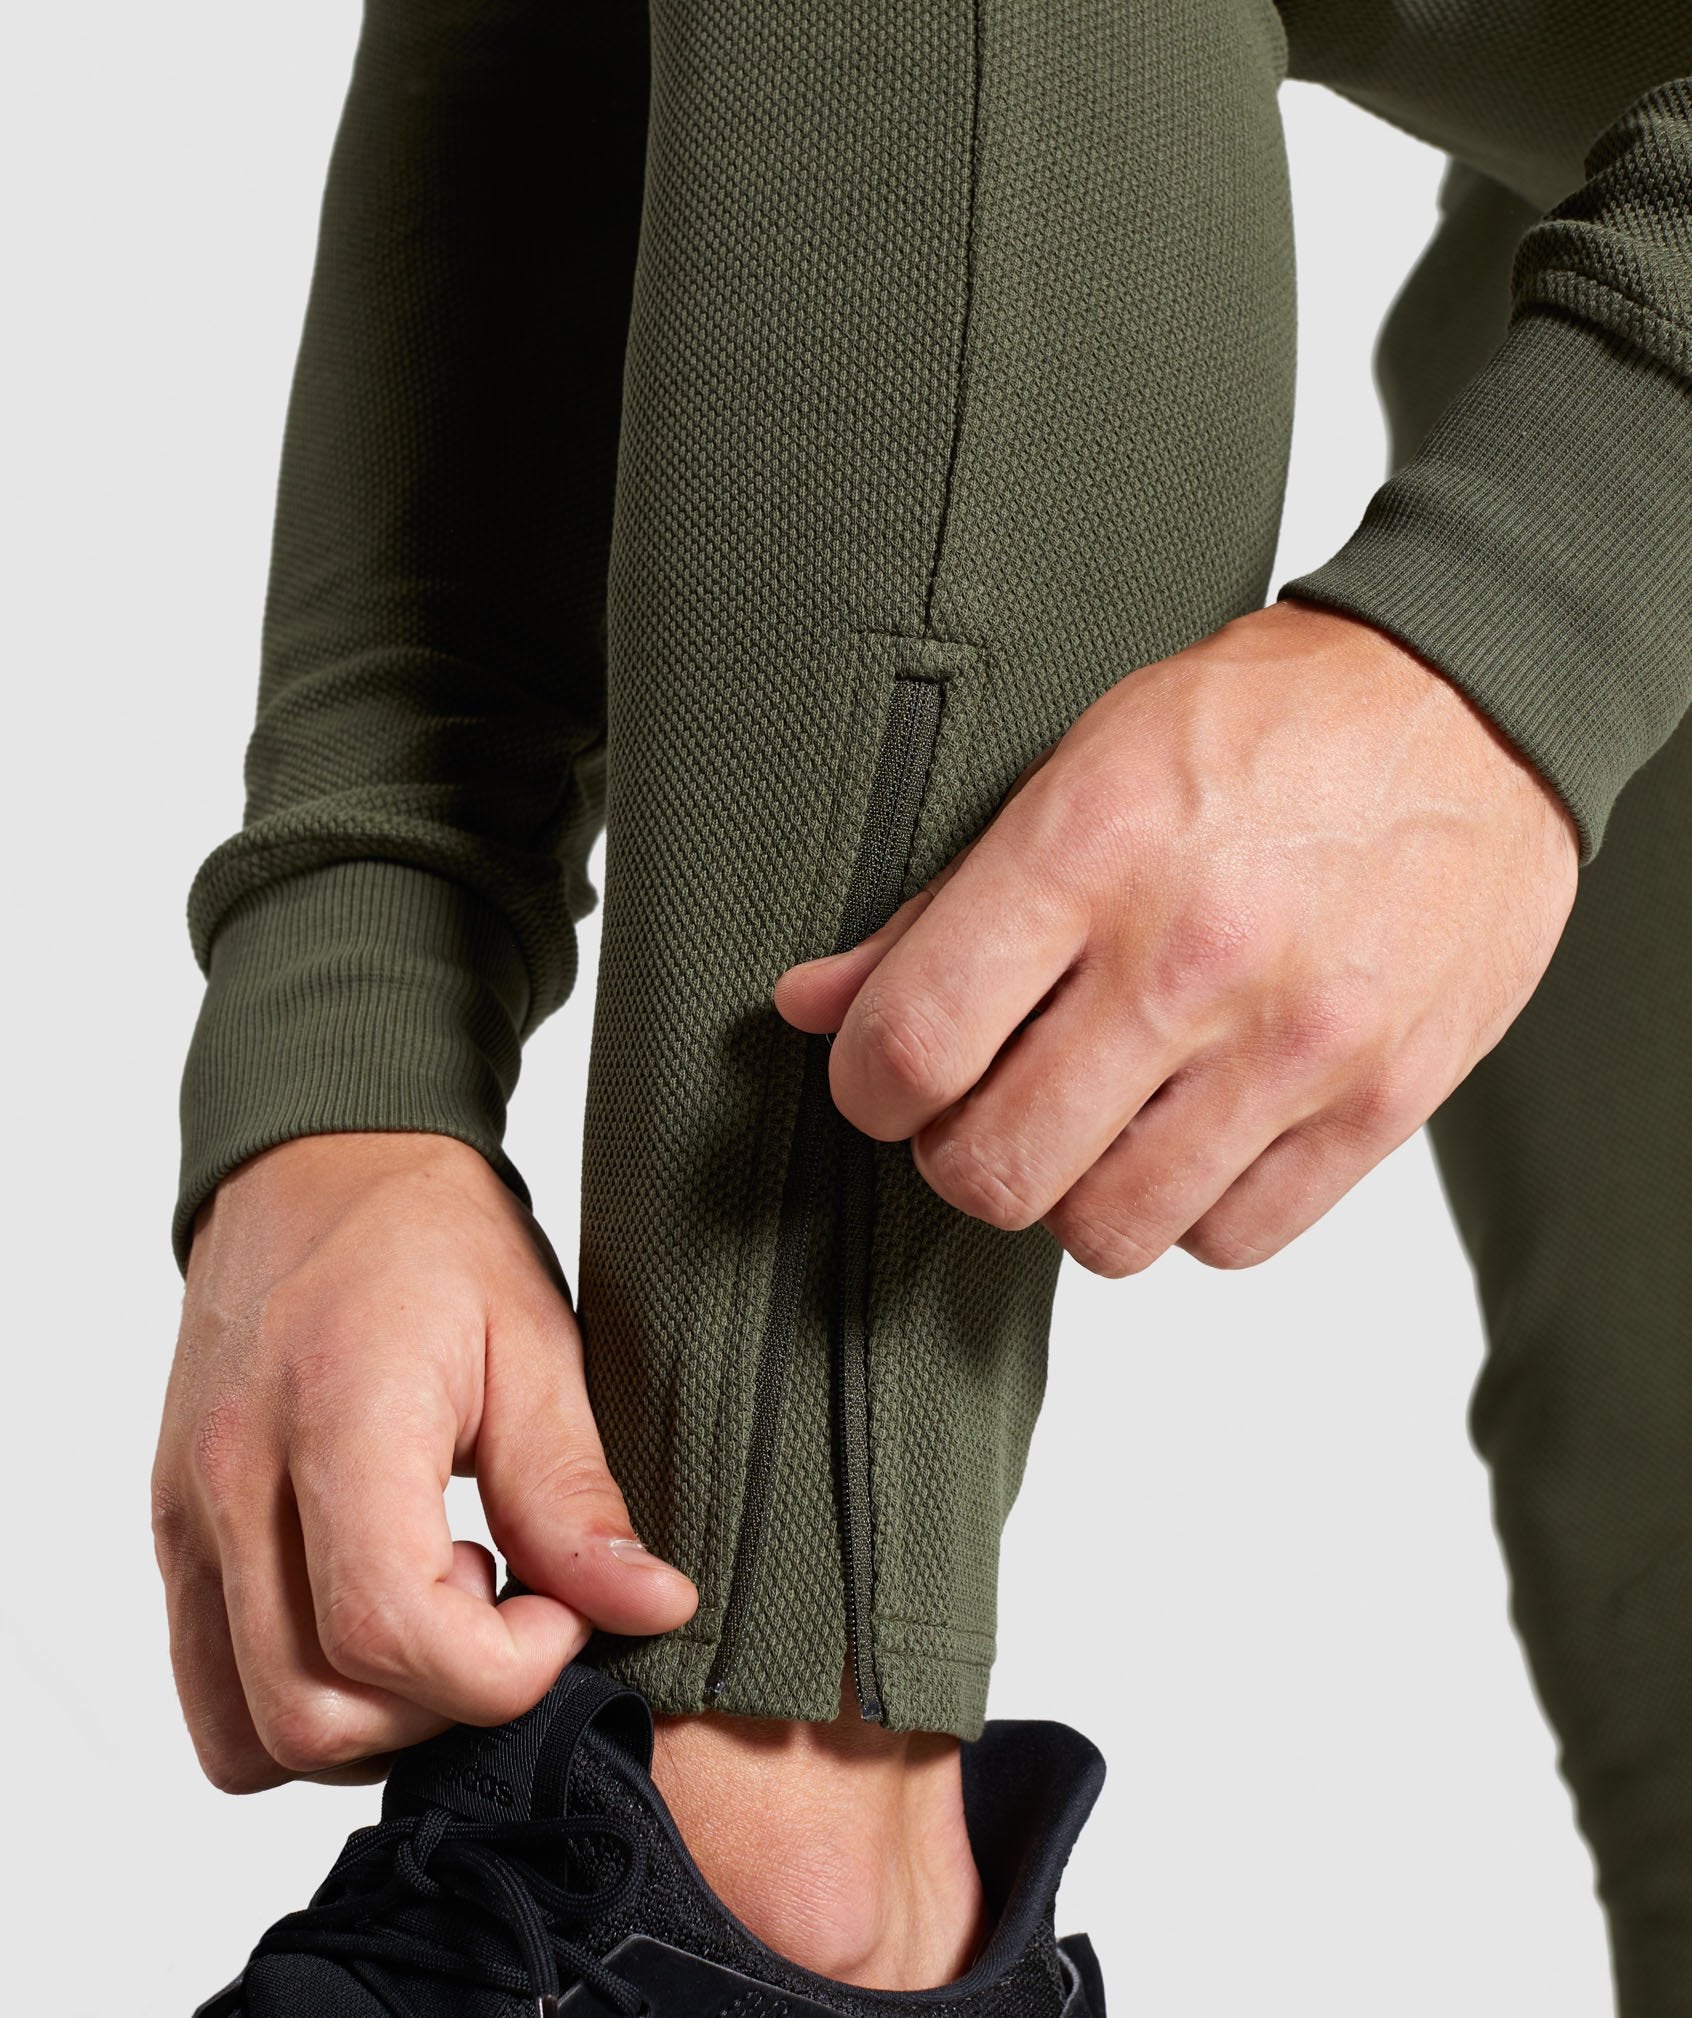 Recharge Joggers in Green